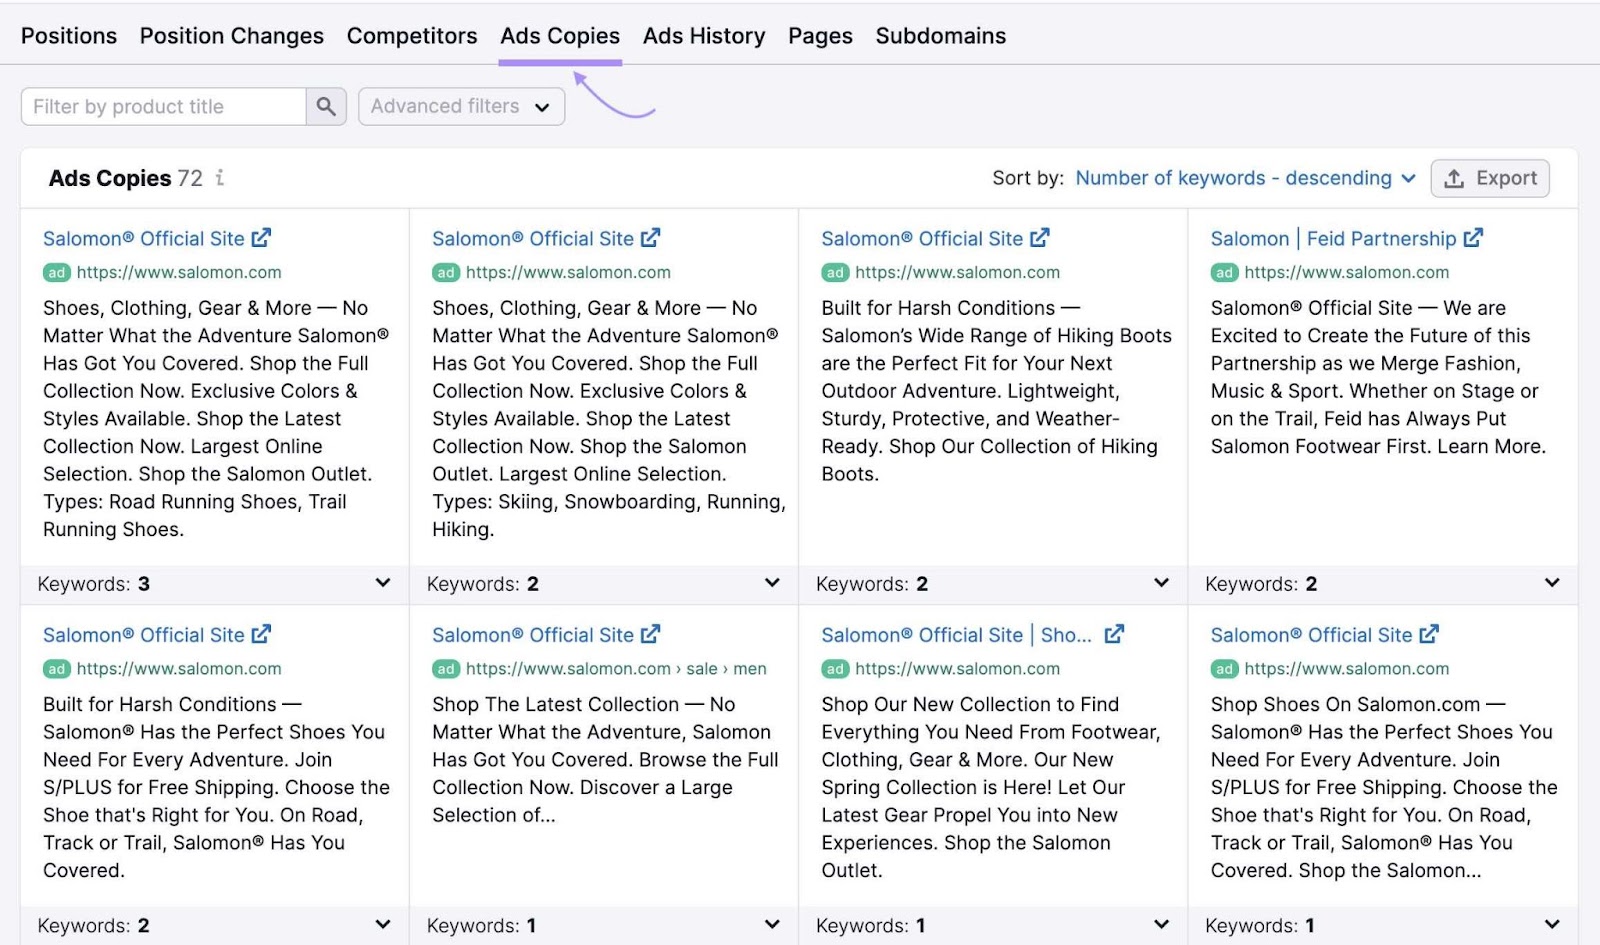 Ads copies shown for competitors' ads successful  Advertising Research tool